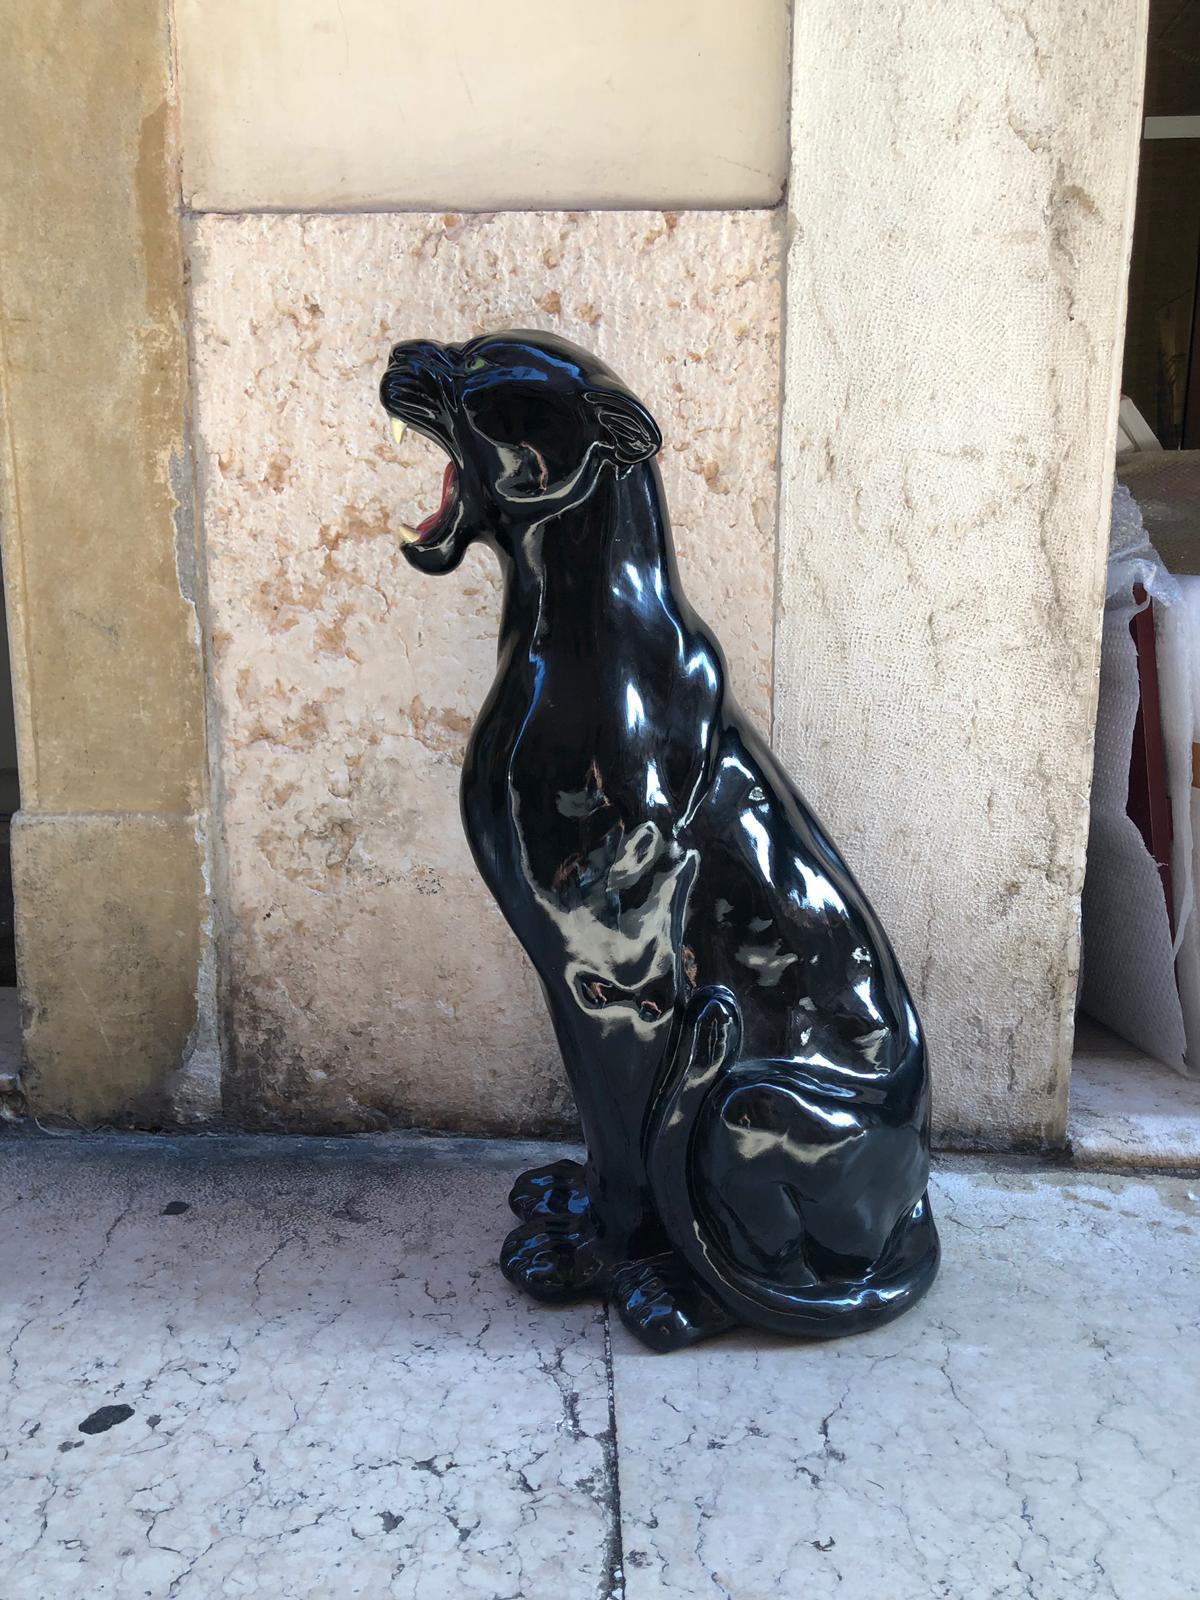 Black shiny ceramic seating and roaring Panther from Italy from 1980s. The inner part of the mouth is red and teeth are white to emphasize the roar. Tail is wrapped around the body. Dimensions: H 88 cm / 35